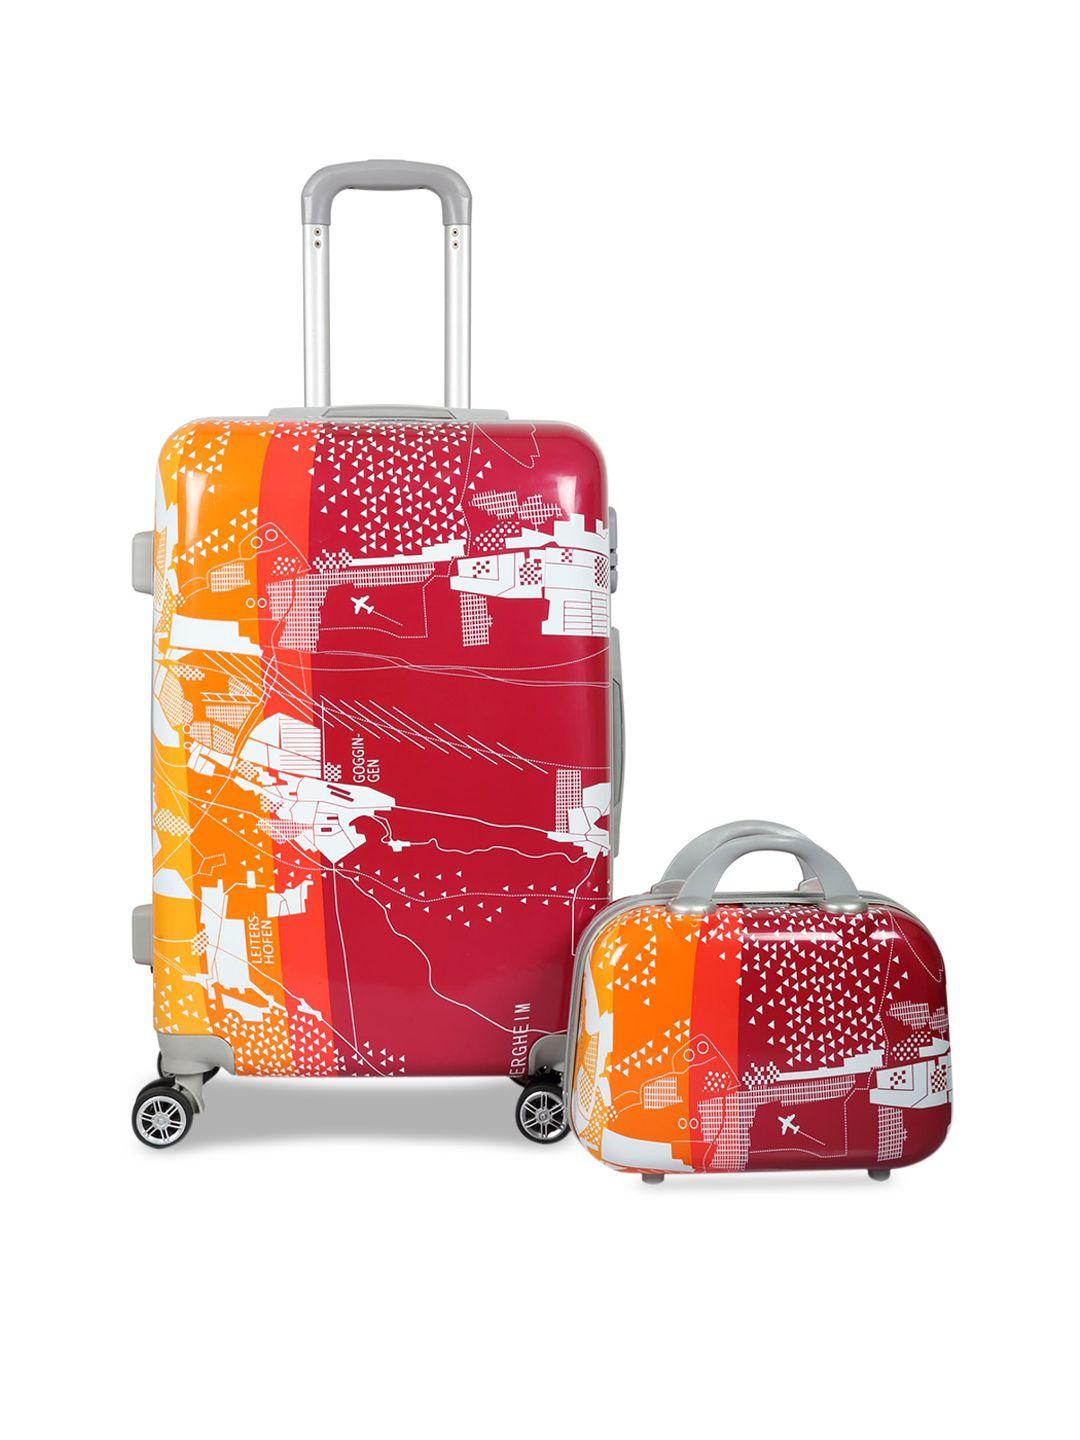 polo class unisex red & orange printed luggage trolley bag with vanity bag